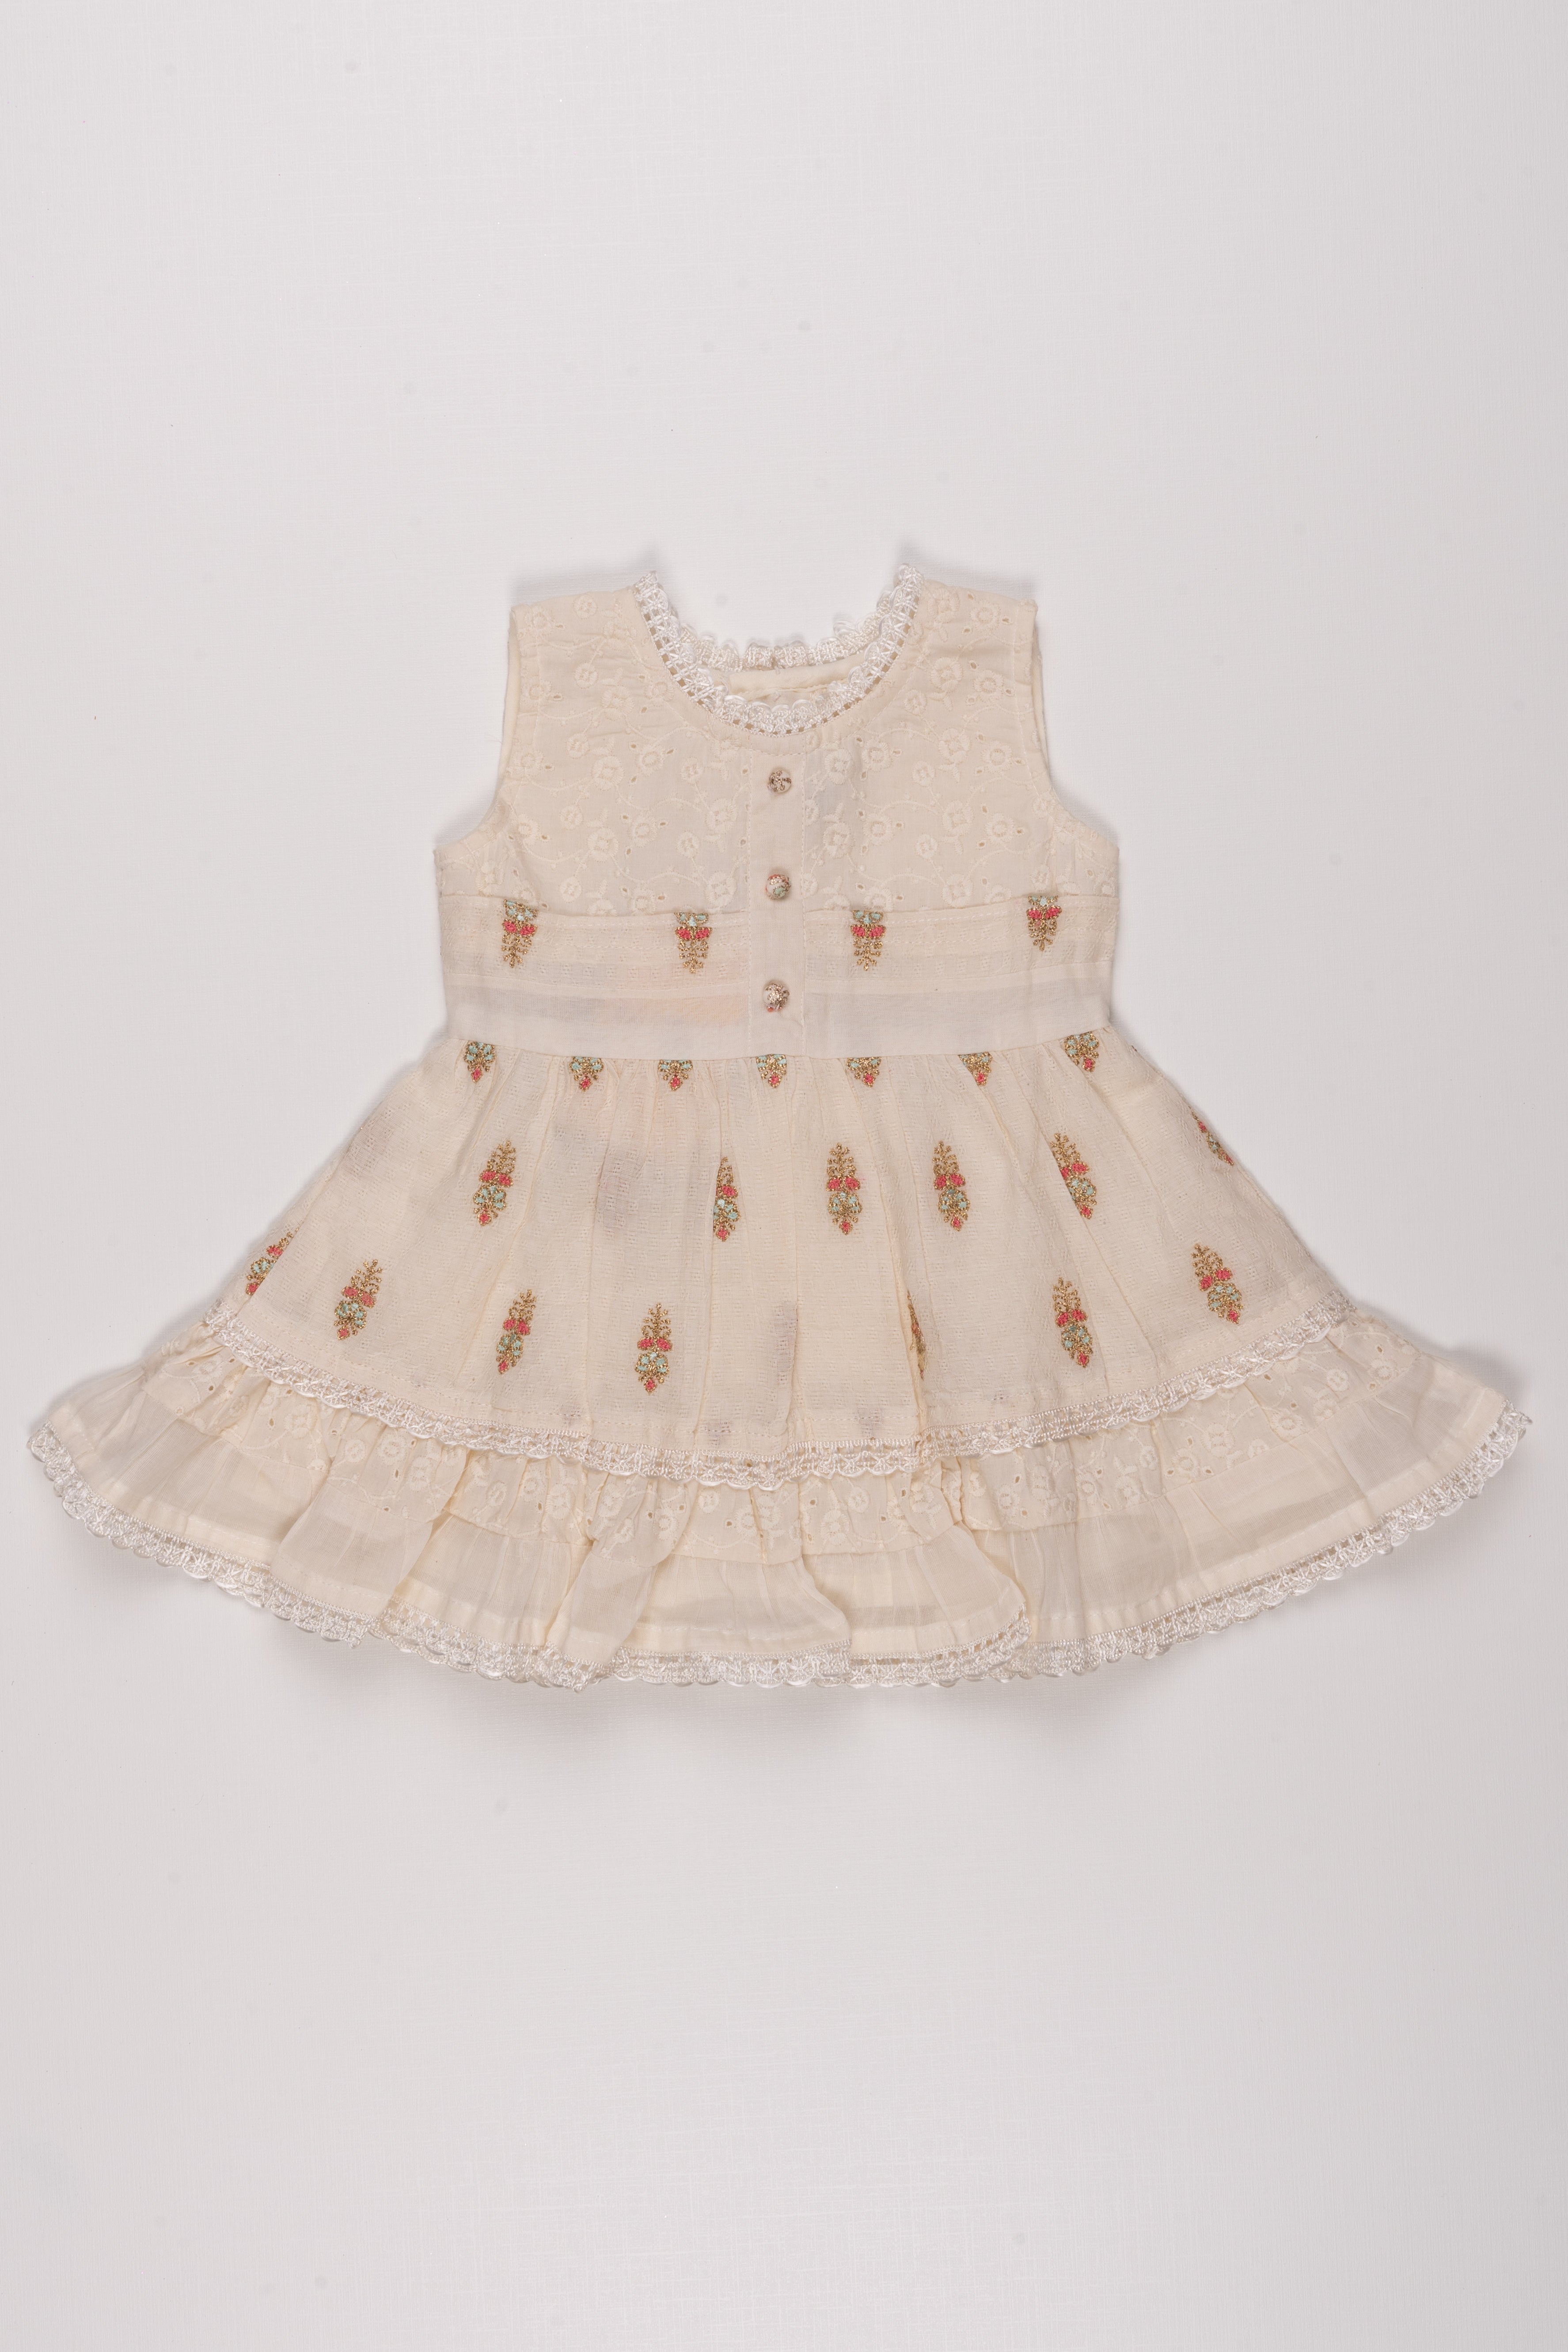 Elegant Whimsy: Lustrous Floral Zari Embroidered Cotton Baby Frock in  Sublime Half White